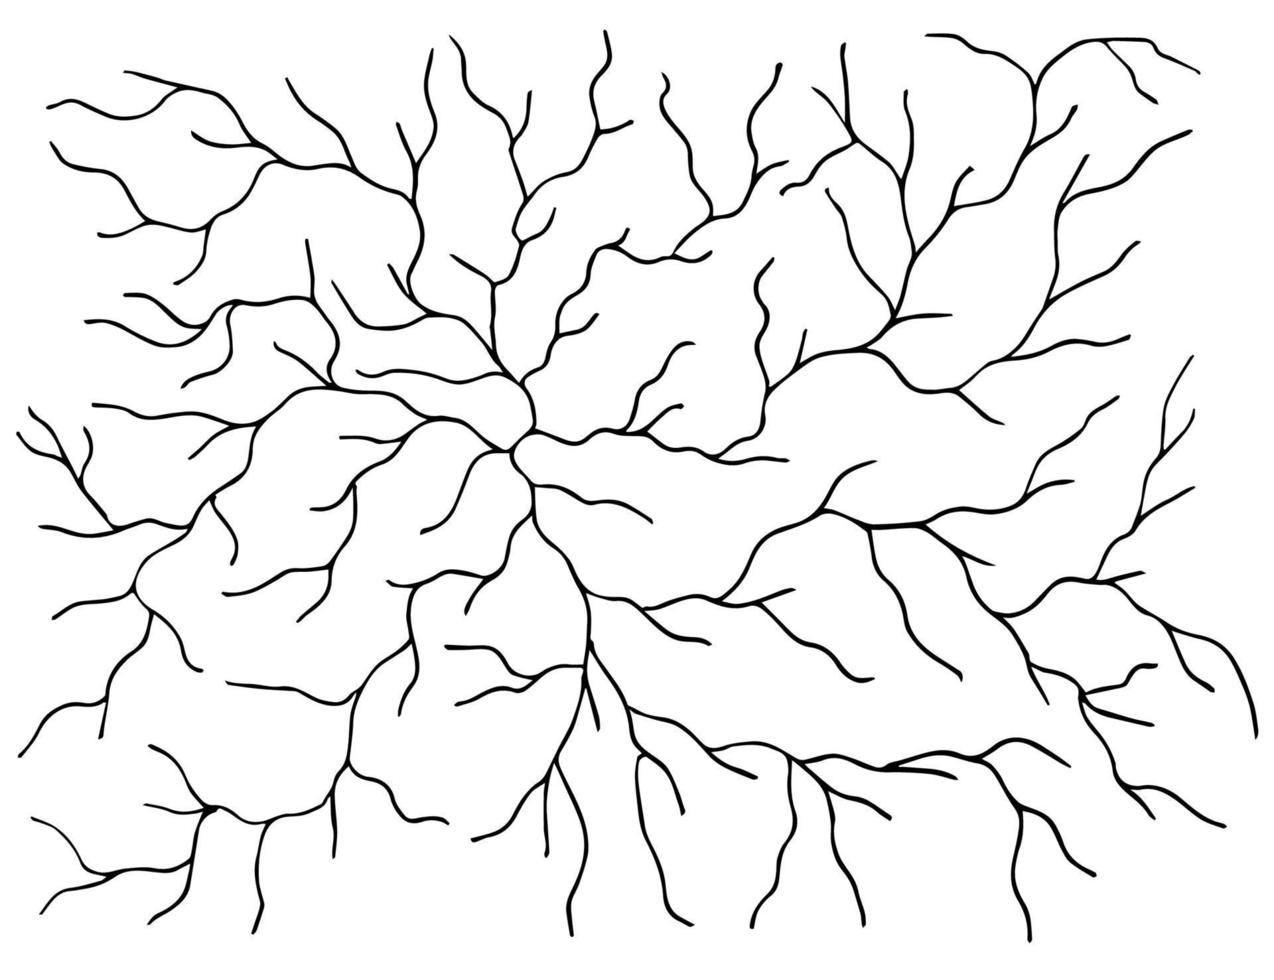 monochrome pattern black and white branches, cracks, natural lines vector